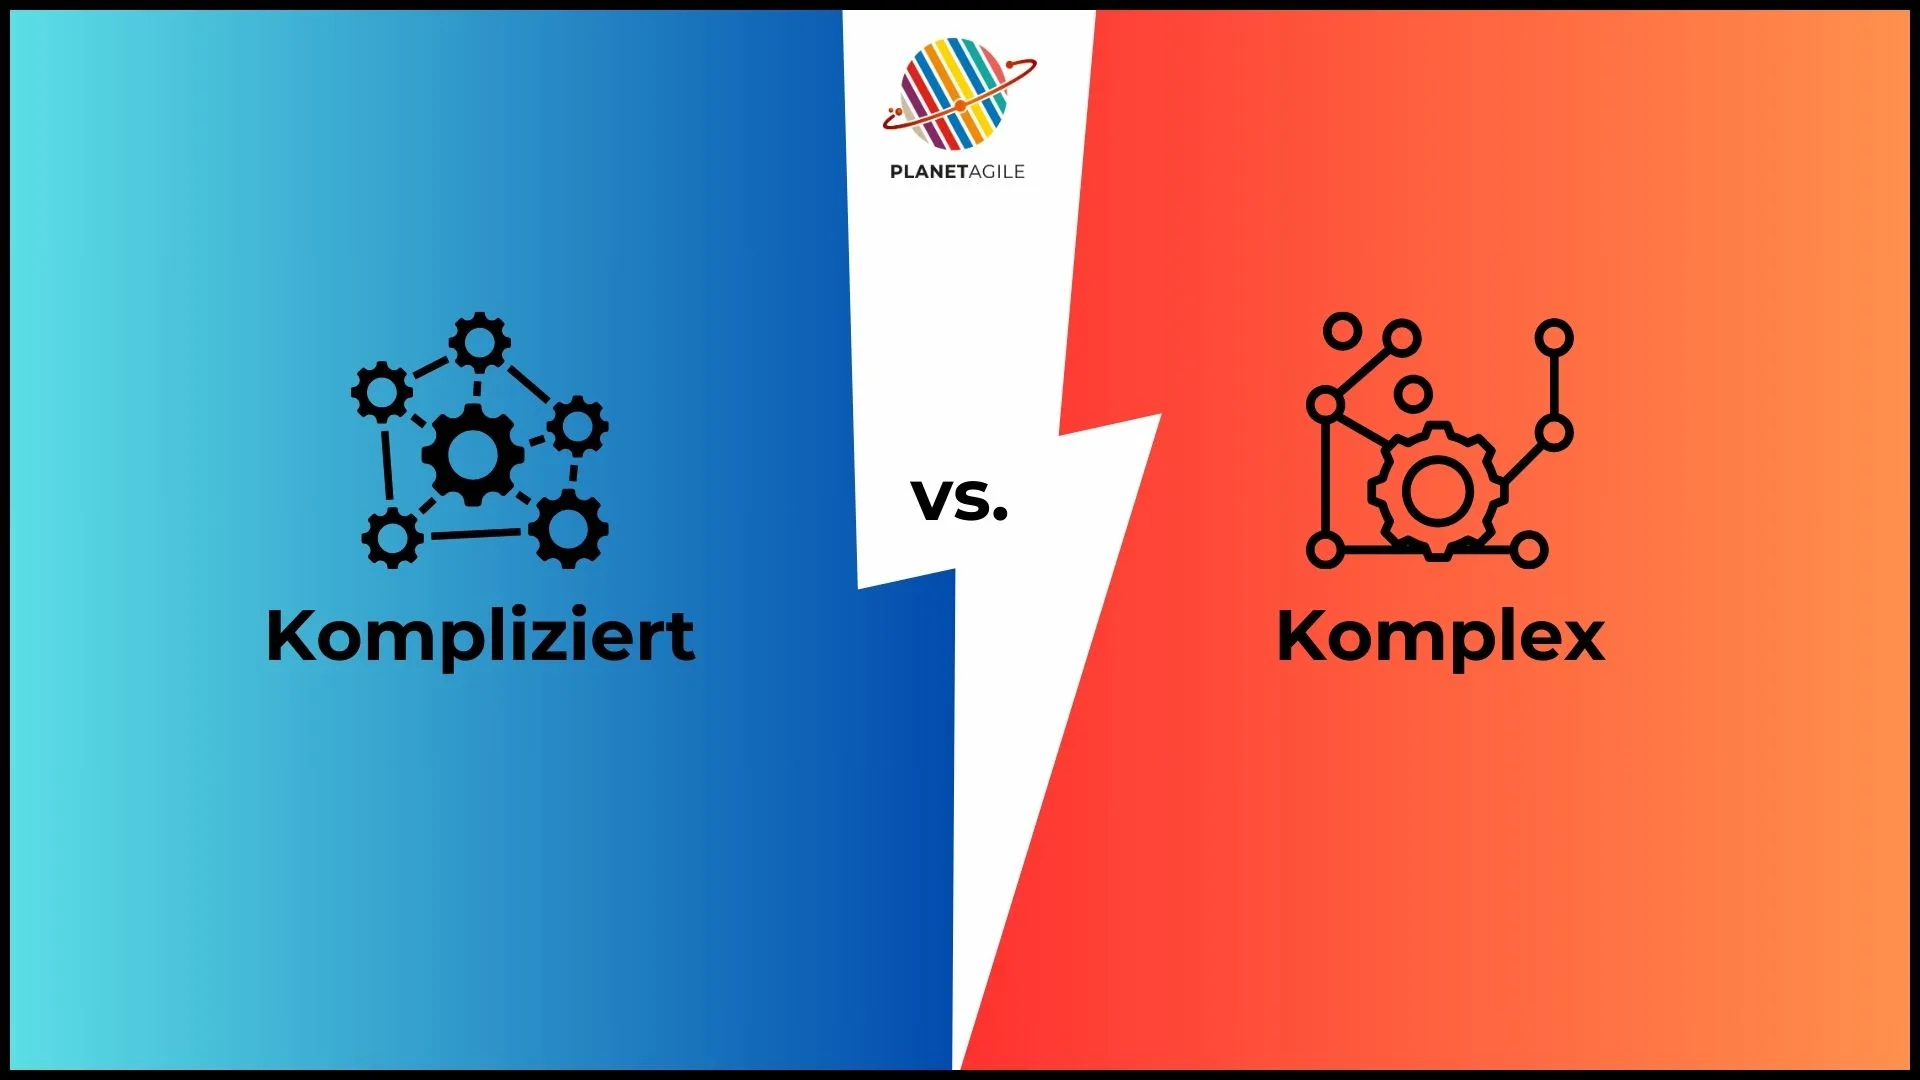 objectives & key results in komplexität